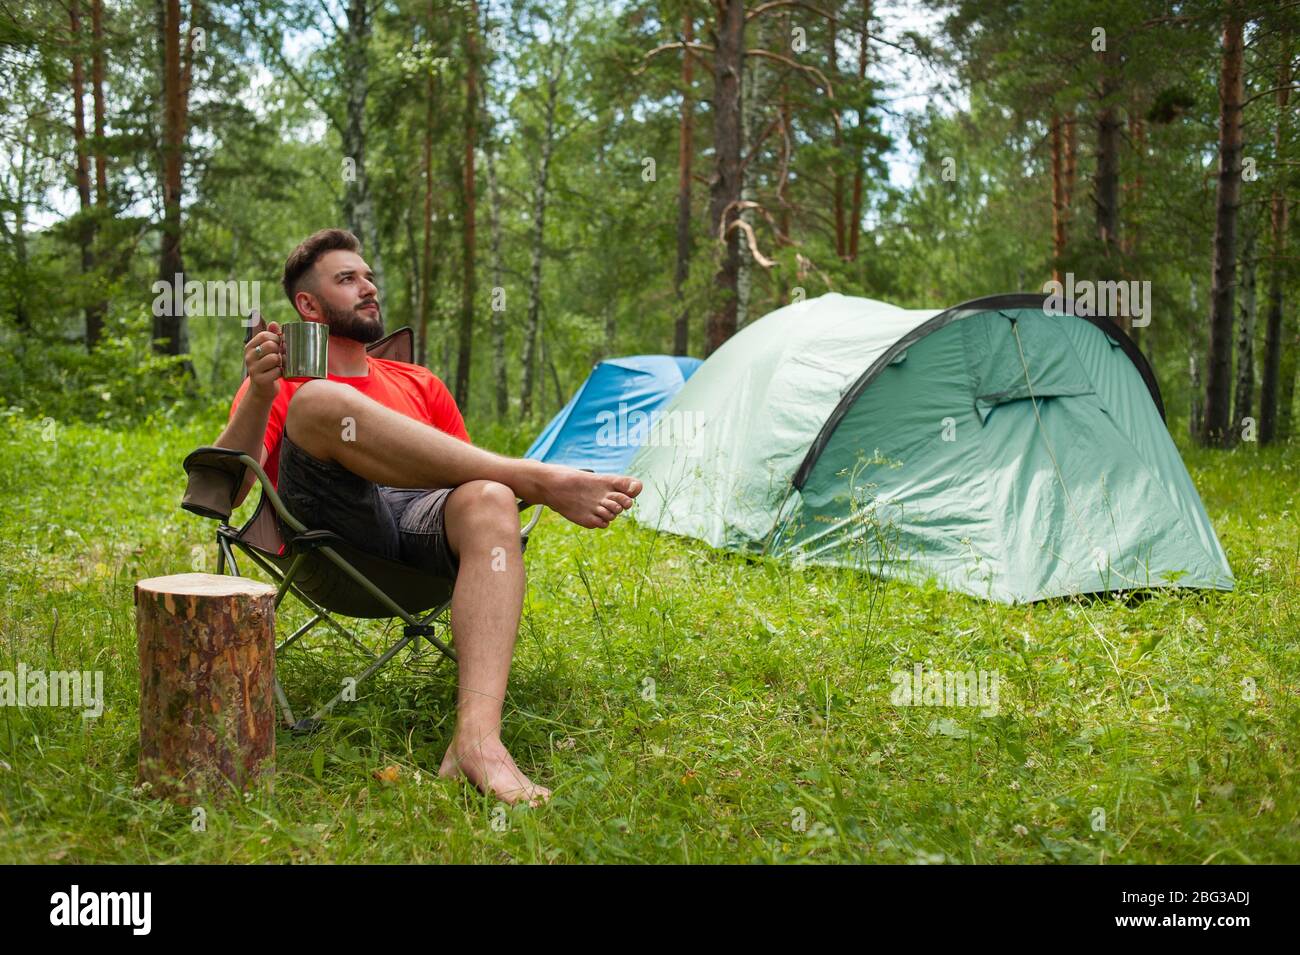 Enjoying life. Young man in nature drinks tea, against the background of a campground. Relaxation, vacations, lifestyle concept Stock Photo